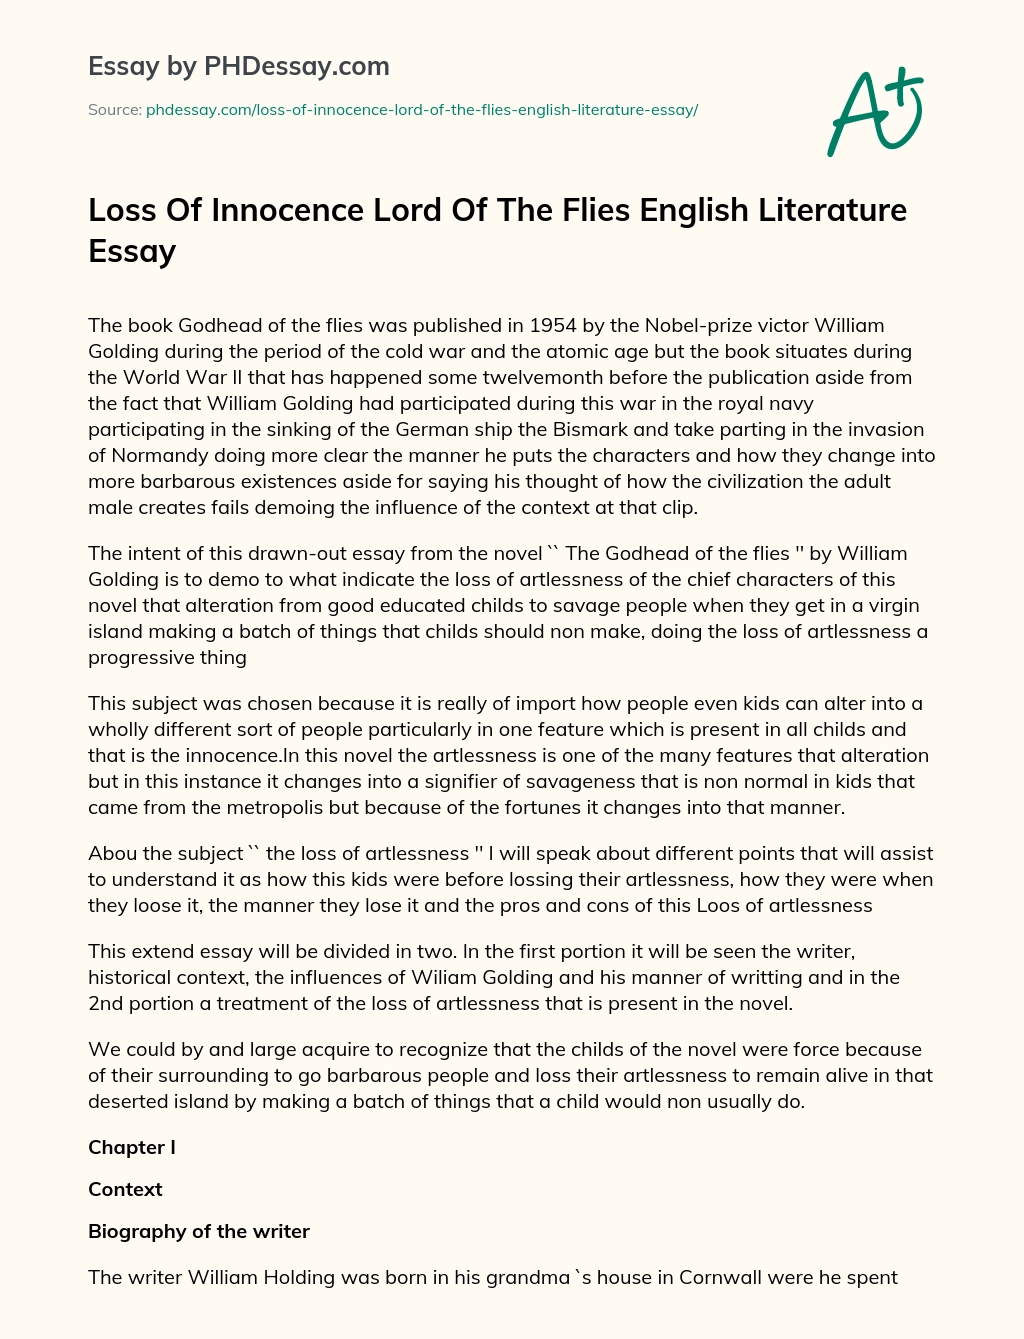 lord of the flies loss of innocence thesis statement